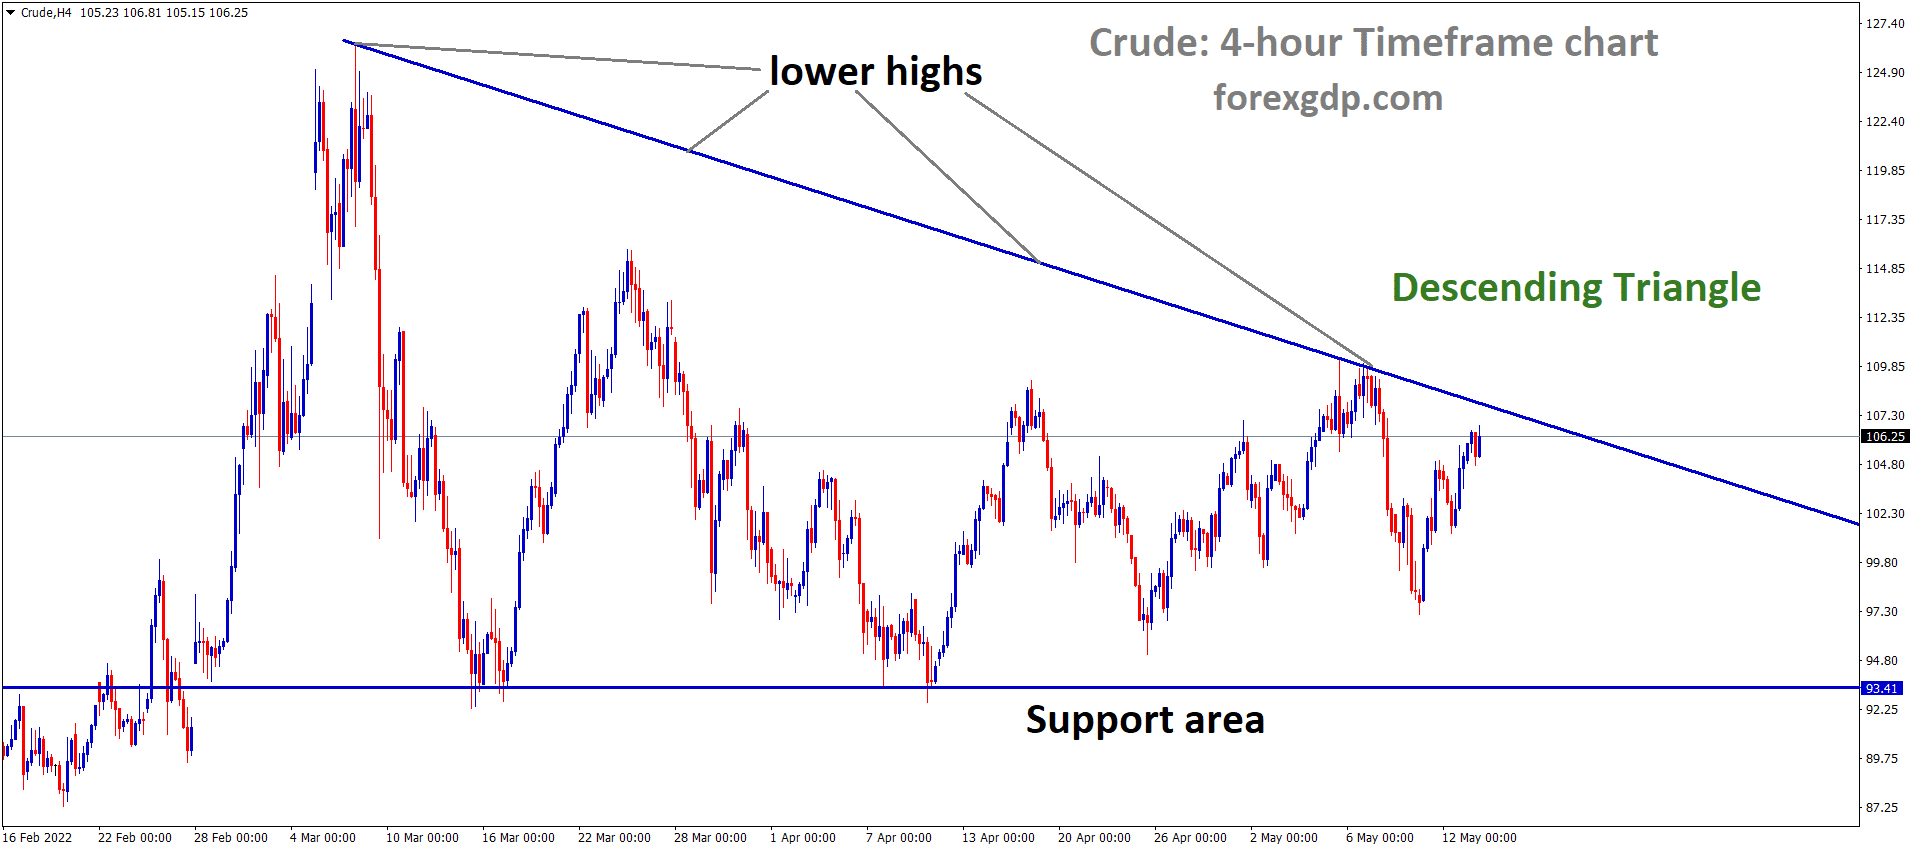 Crude H4 Time Frame Analysis Market is moving in the Descending triangle pattern and the market has reached the lower high area of the Pattern